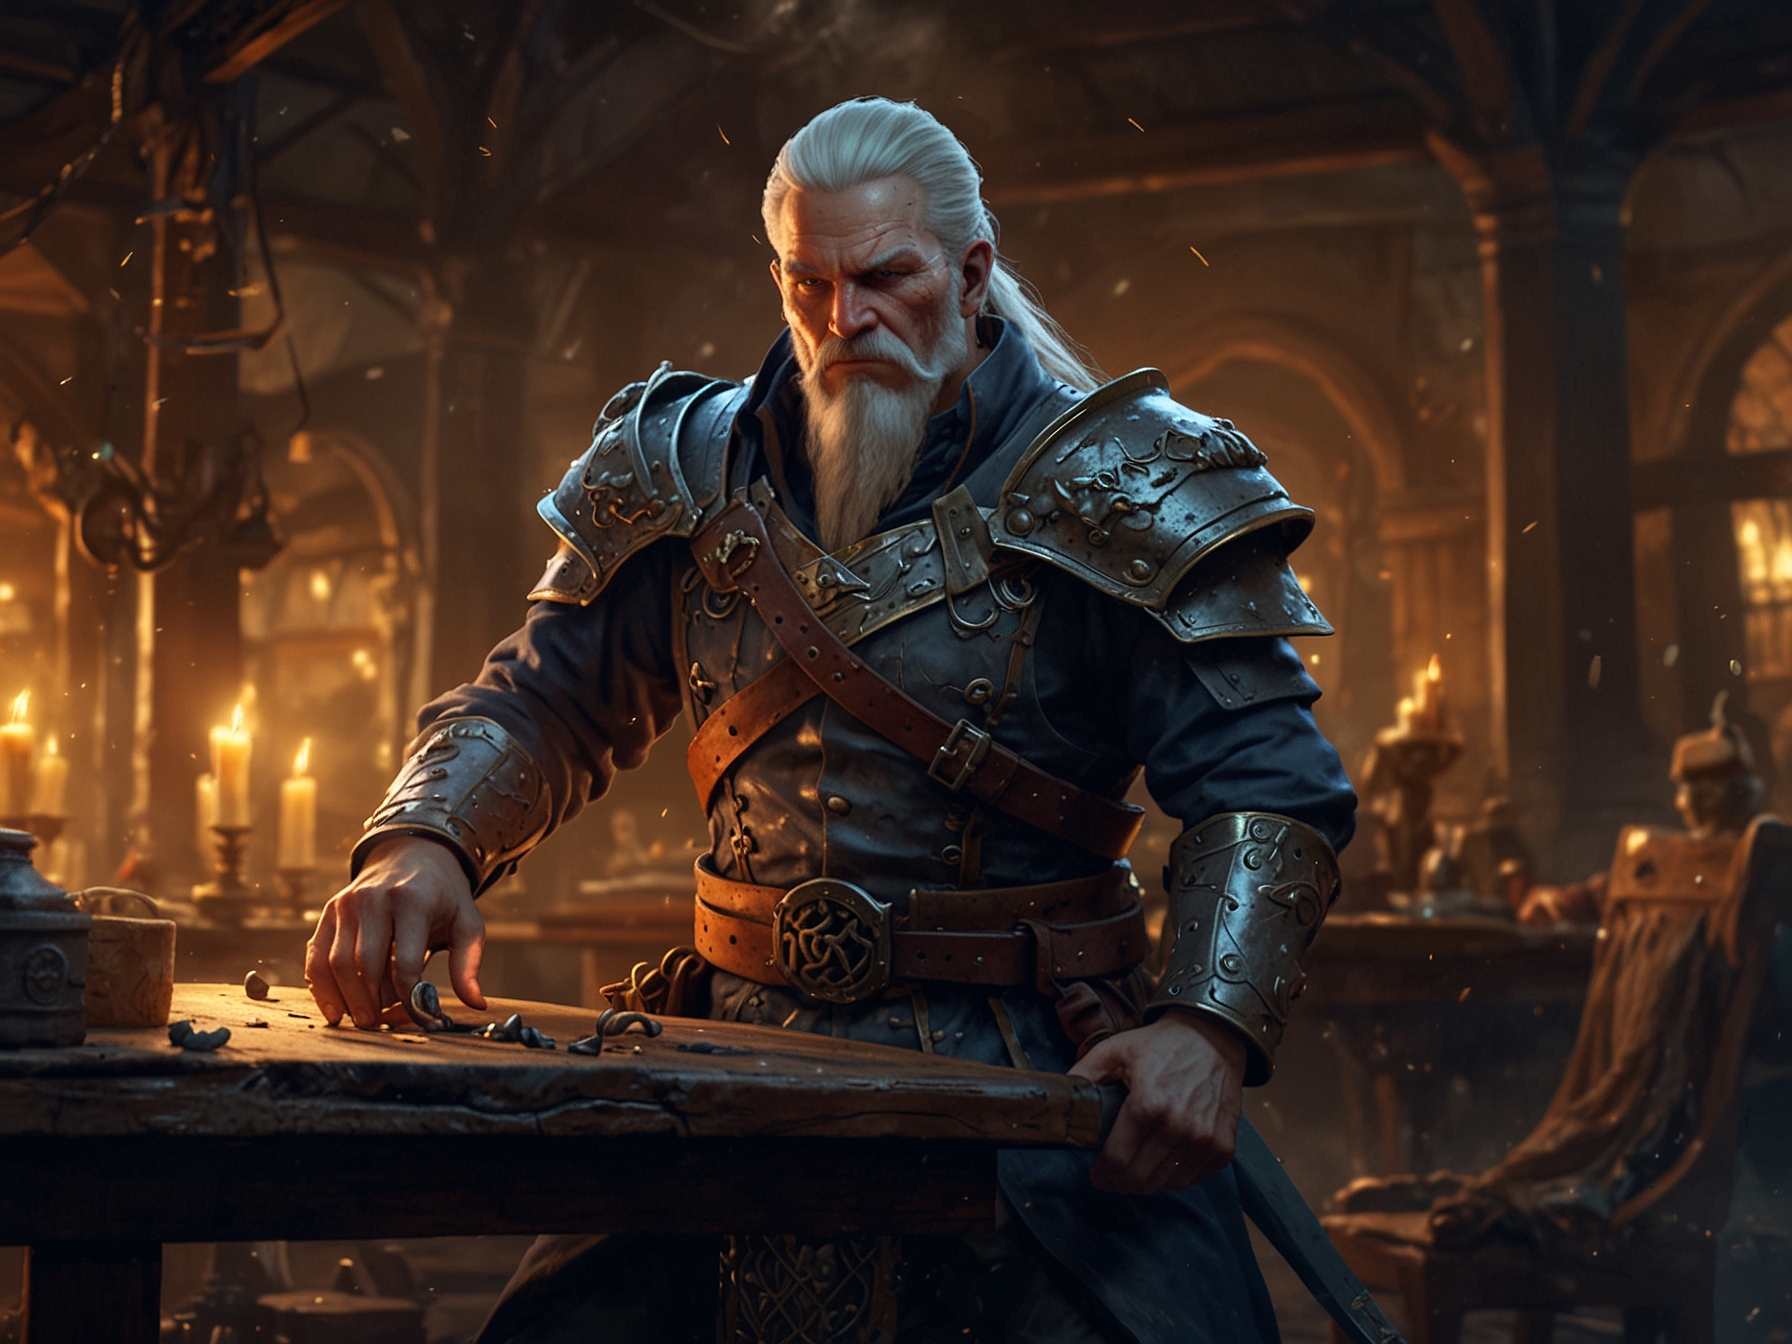 Steam Deck player experiencing severe frame rate drops and gameplay disruptions in Elden Ring post-patch, highlighting community frustration and the need for a hotfix.